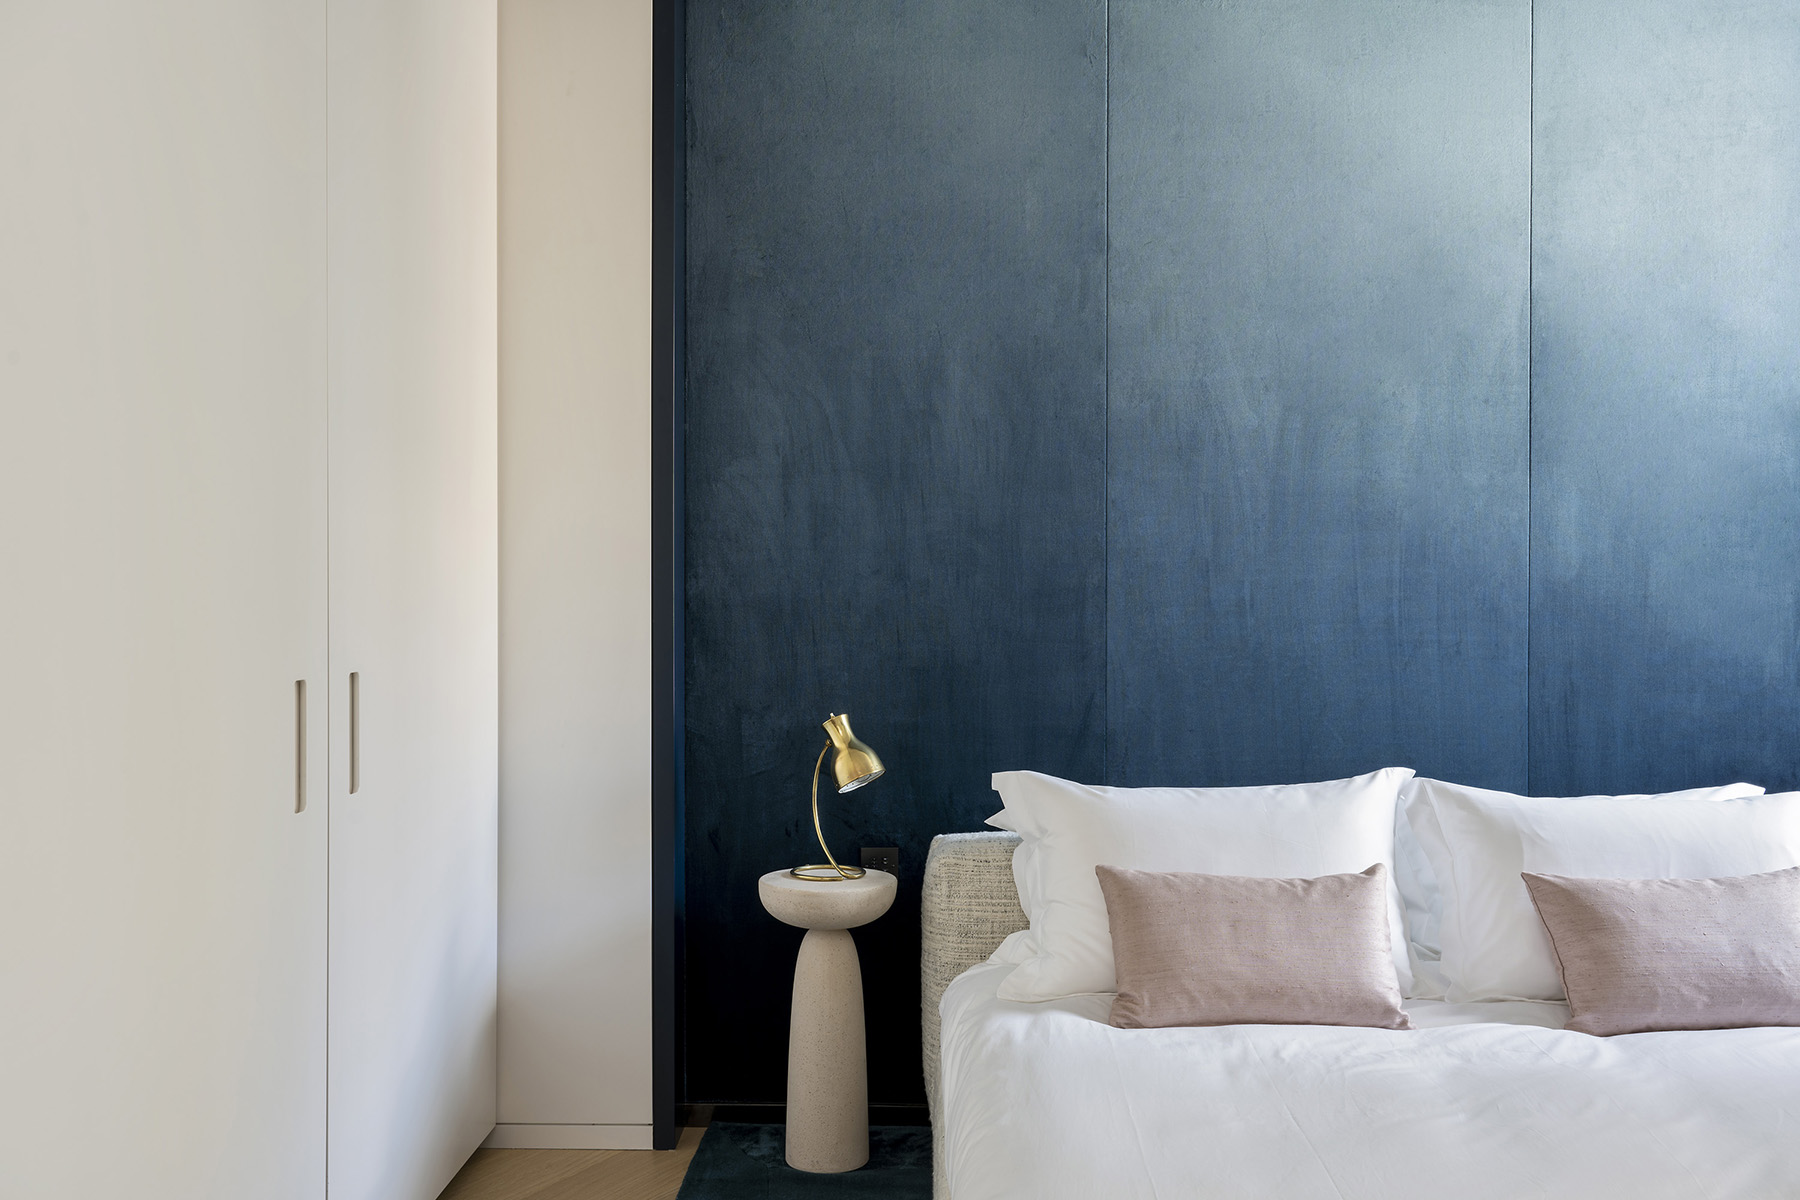 Third floor apartment guest suite with petrol blue silk velvet wall